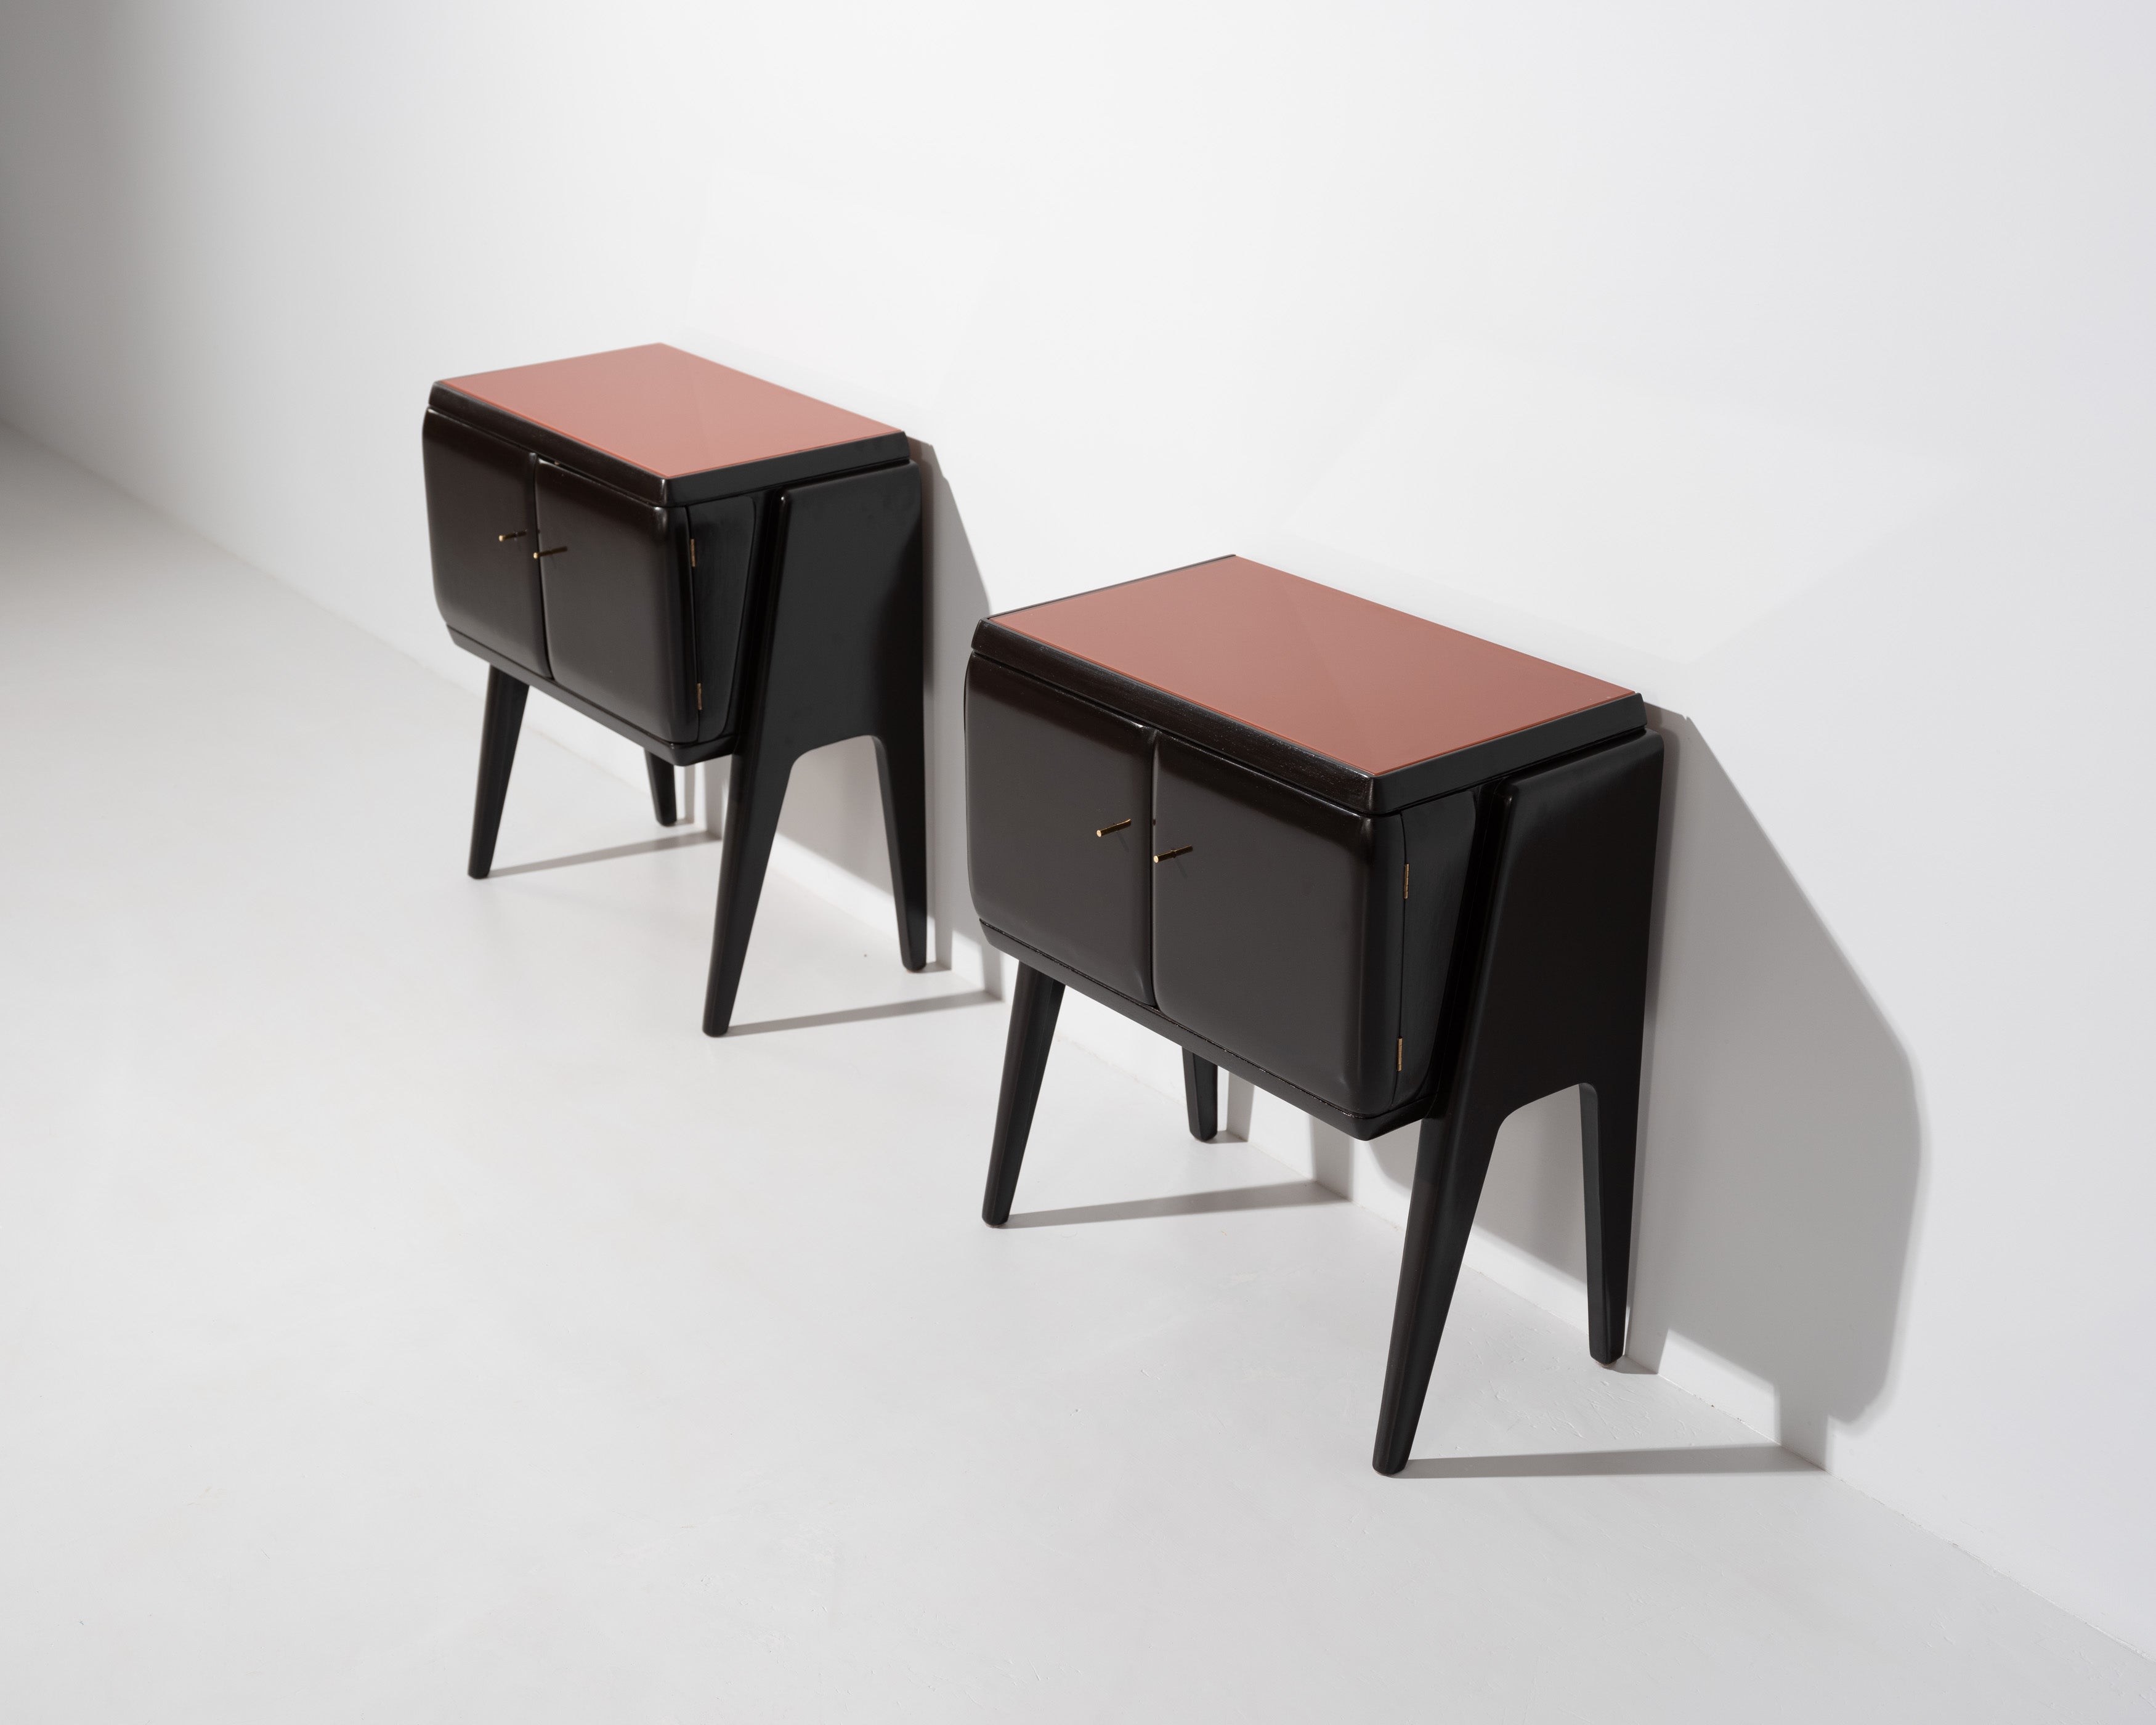 Mid-Century Modern Pair of Bedside Tables in Black Lacquered Wood, Brass and Glass, 1950s